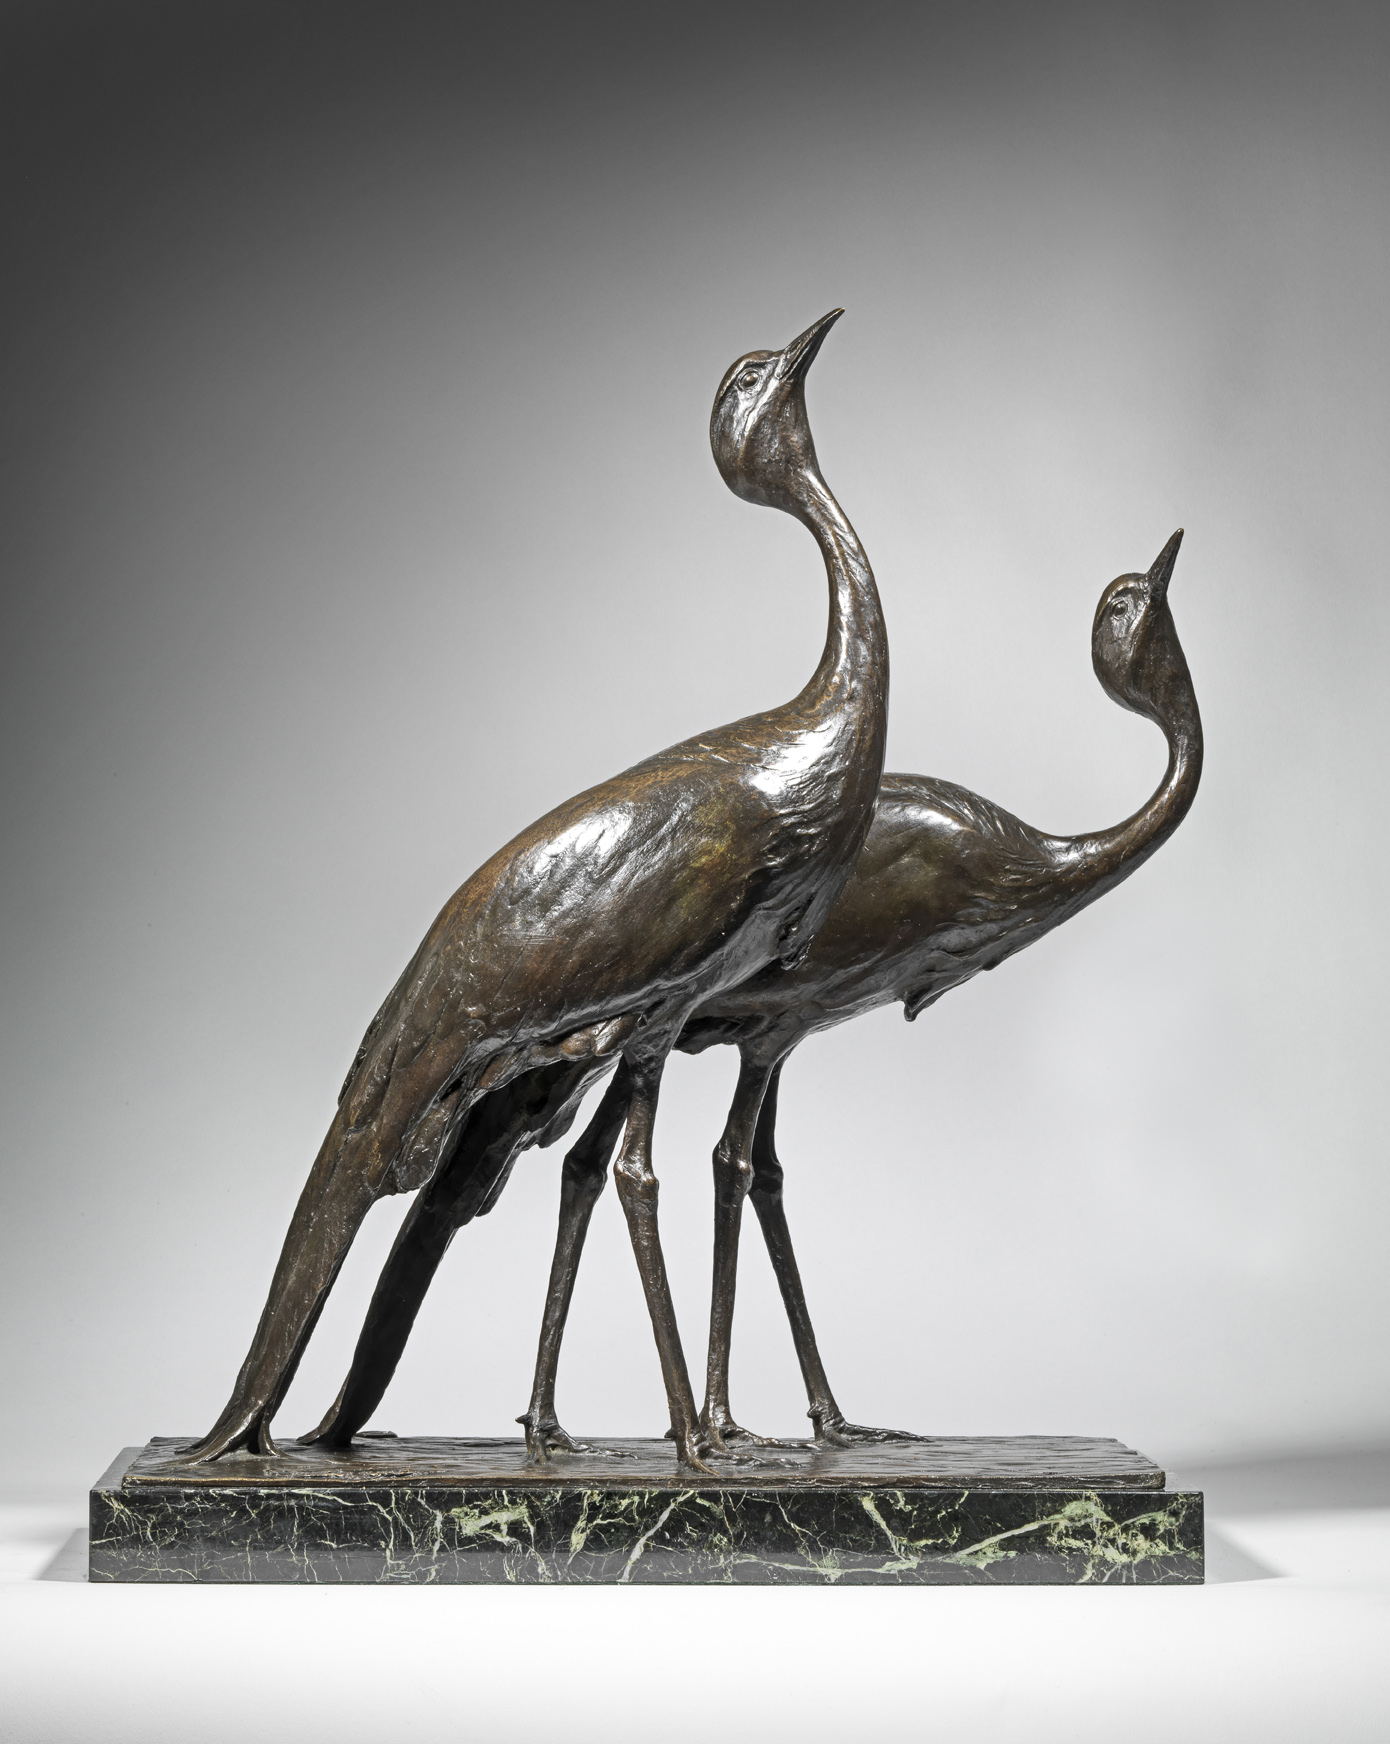 Two Crowned Cranes, c. 1930